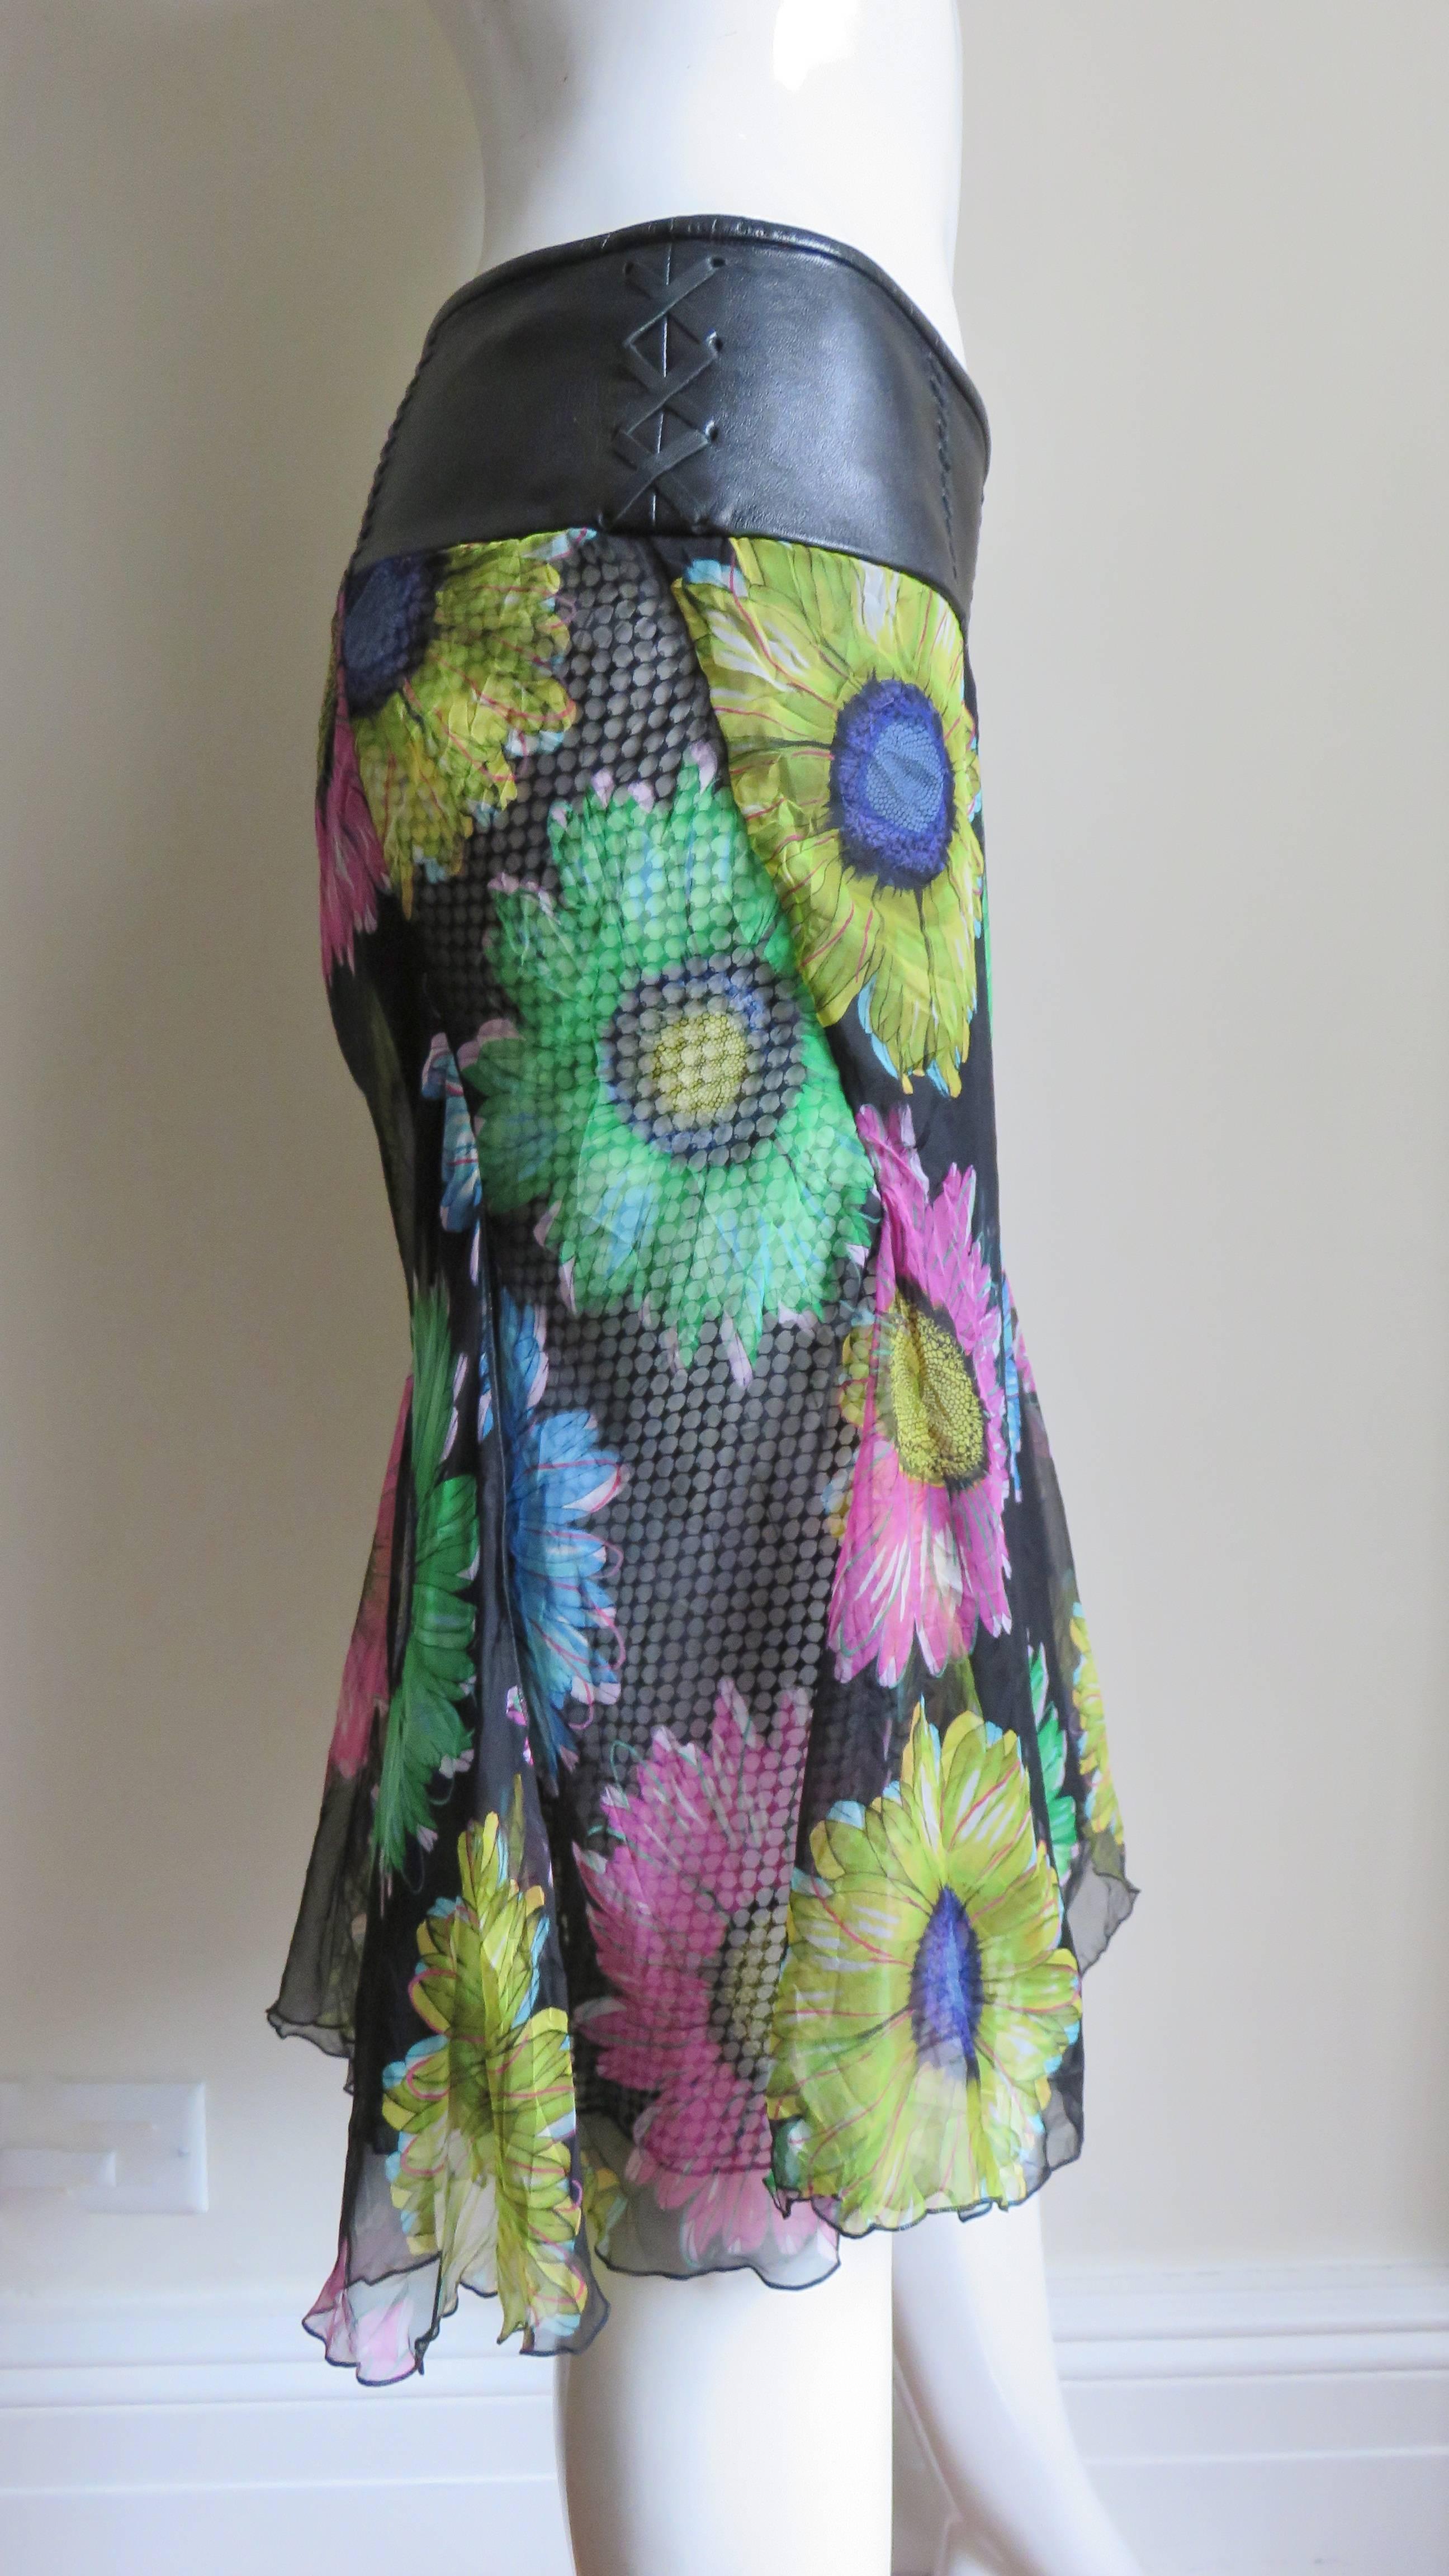 Gianni Versace Silk Skirt with Leather Band 1990s For Sale 3